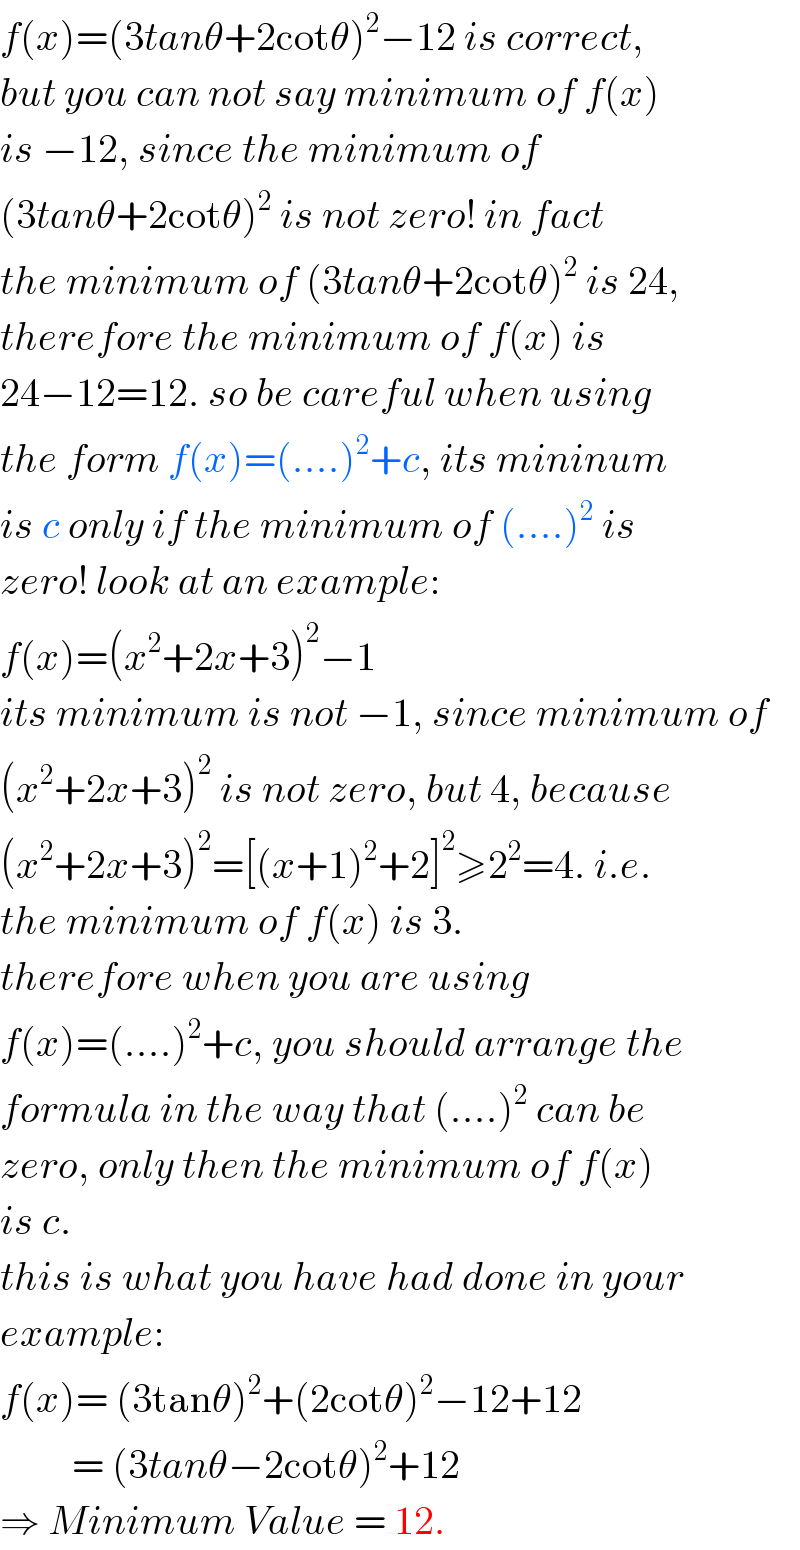 f(x)=(3tanθ+2cotθ)^2 −12 is correct,  but you can not say minimum of f(x)  is −12, since the minimum of  (3tanθ+2cotθ)^2  is not zero! in fact  the minimum of (3tanθ+2cotθ)^2  is 24,  therefore the minimum of f(x) is  24−12=12. so be careful when using  the form f(x)=(....)^2 +c, its mininum  is c only if the minimum of (....)^2  is  zero! look at an example:  f(x)=(x^2 +2x+3)^2 −1  its minimum is not −1, since minimum of  (x^2 +2x+3)^2  is not zero, but 4, because  (x^2 +2x+3)^2 =[(x+1)^2 +2]^2 ≥2^2 =4. i.e.  the minimum of f(x) is 3.  therefore when you are using  f(x)=(....)^2 +c, you should arrange the  formula in the way that (....)^2  can be  zero, only then the minimum of f(x)  is c.  this is what you have had done in your  example:  f(x)= (3tanθ)^2 +(2cotθ)^2 −12+12           = (3tanθ−2cotθ)^2 +12  ⇒ Minimum Value = 12.  